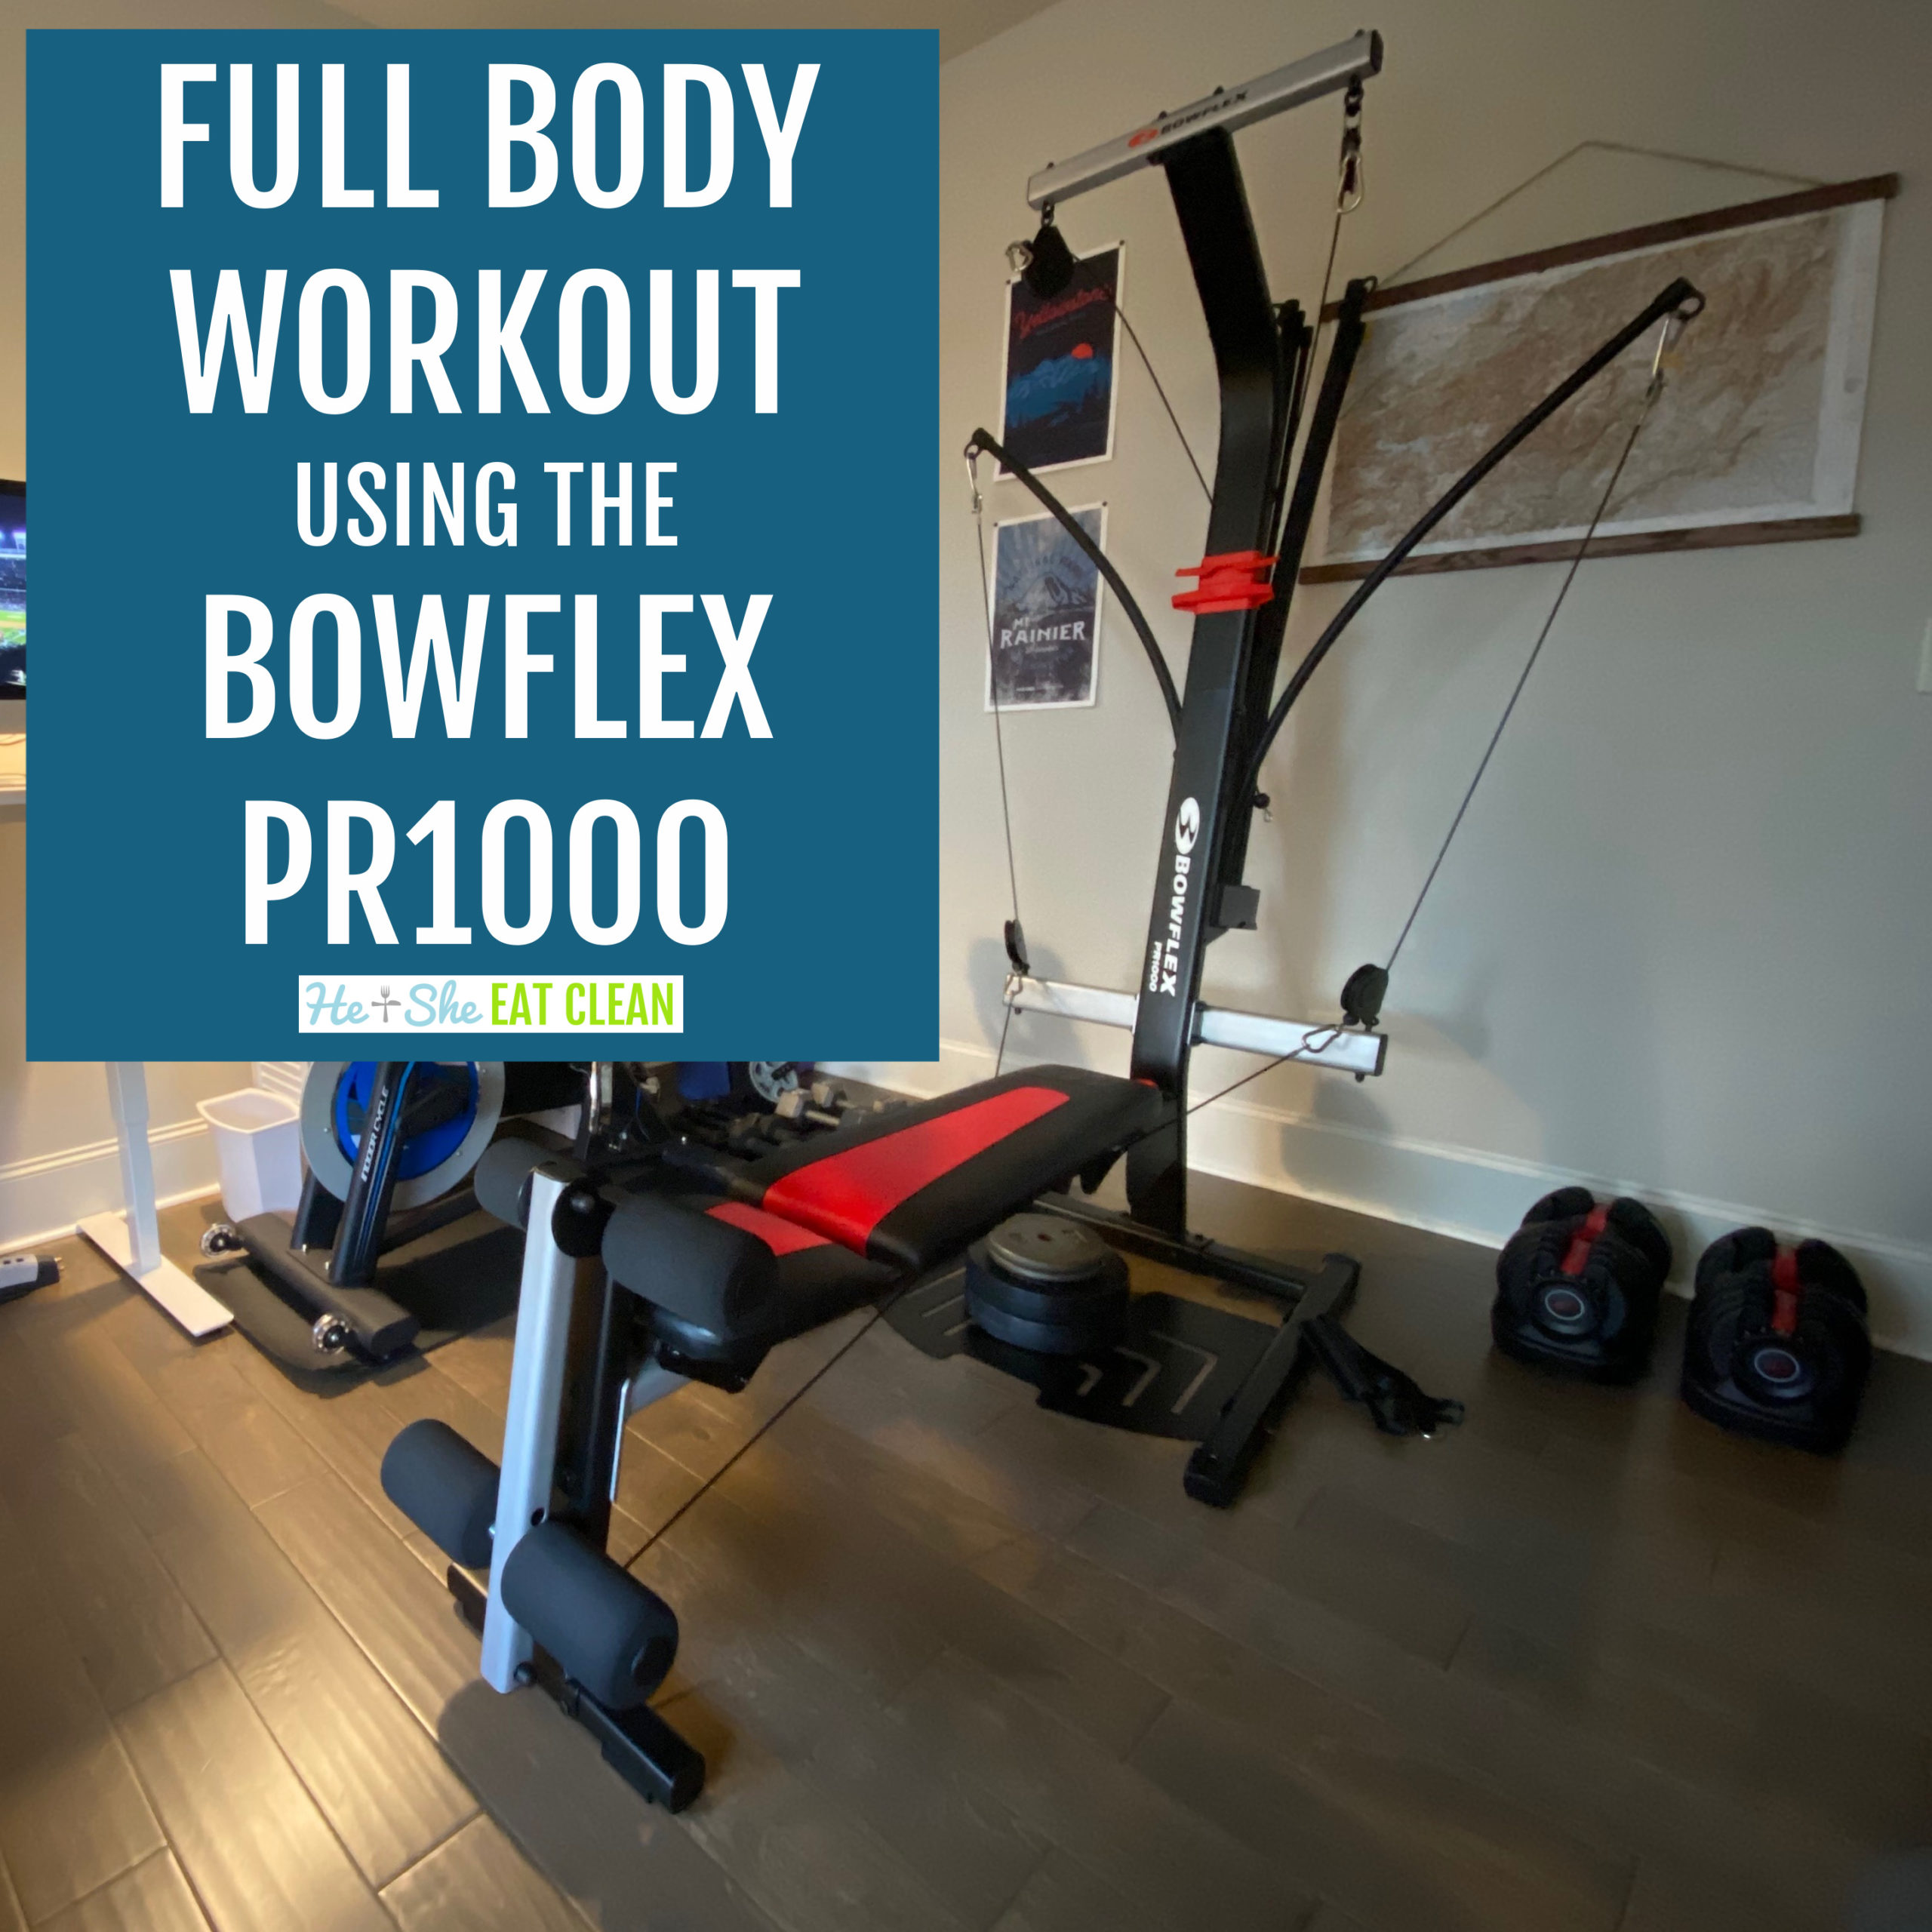 Full Body Workout Using The Bowflex